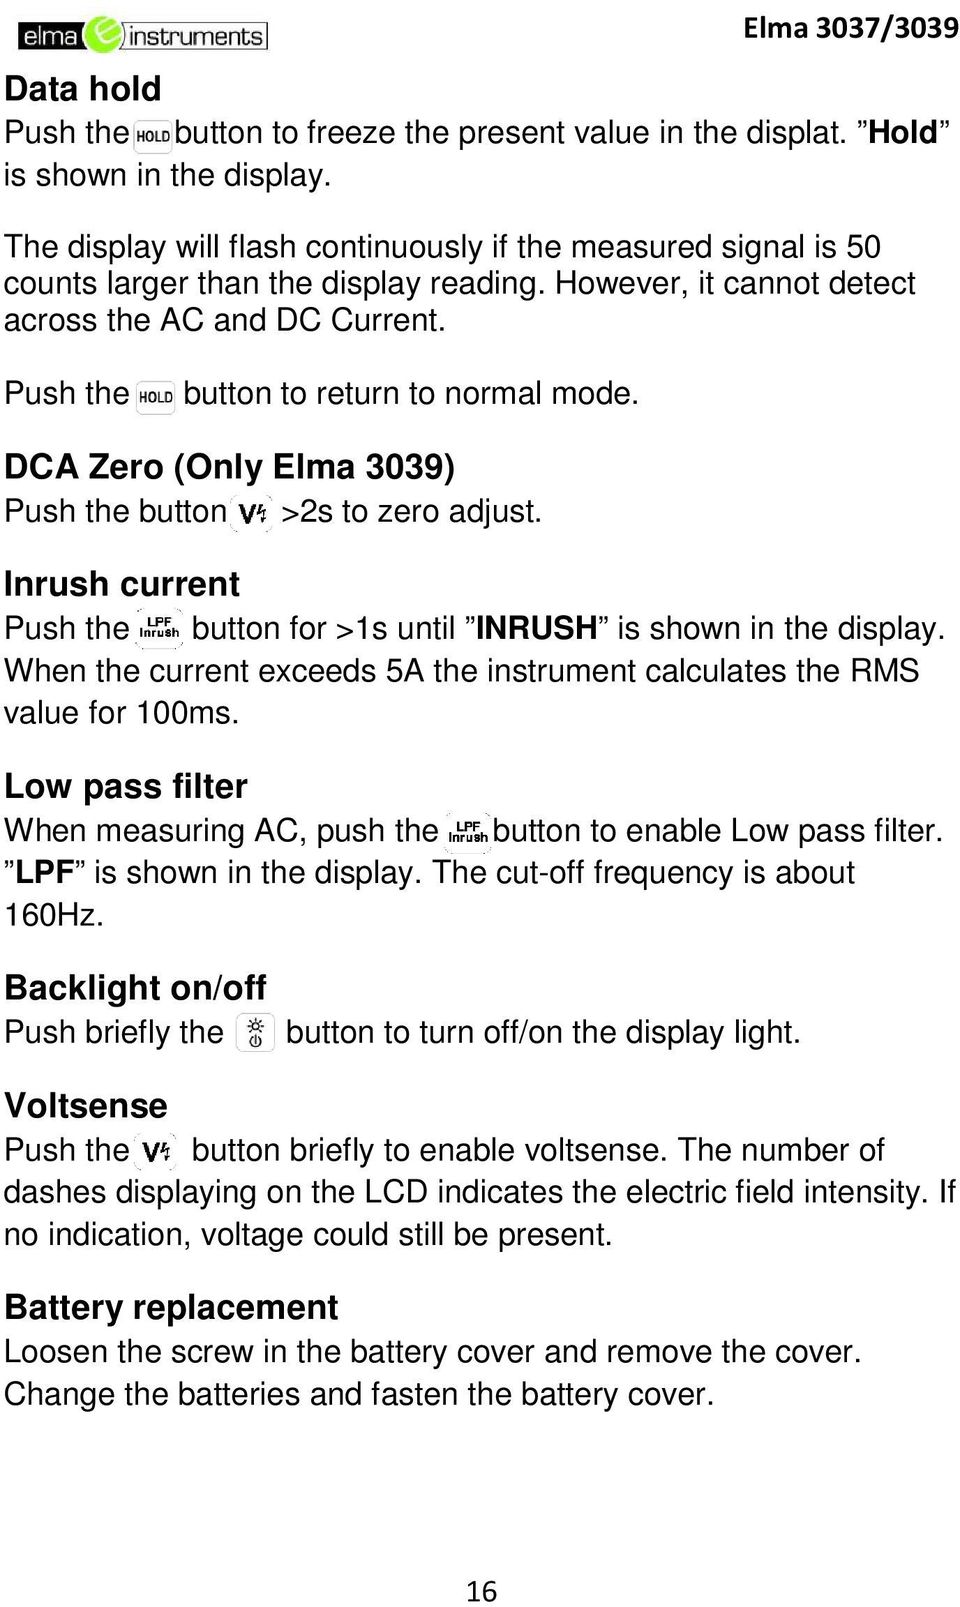 Push the button to return to normal mode. DCA Zero (Only Elma 3039) Push the button >2s to zero adjust. Inrush current Push the button for >1s until INRUSH is shown in the display.